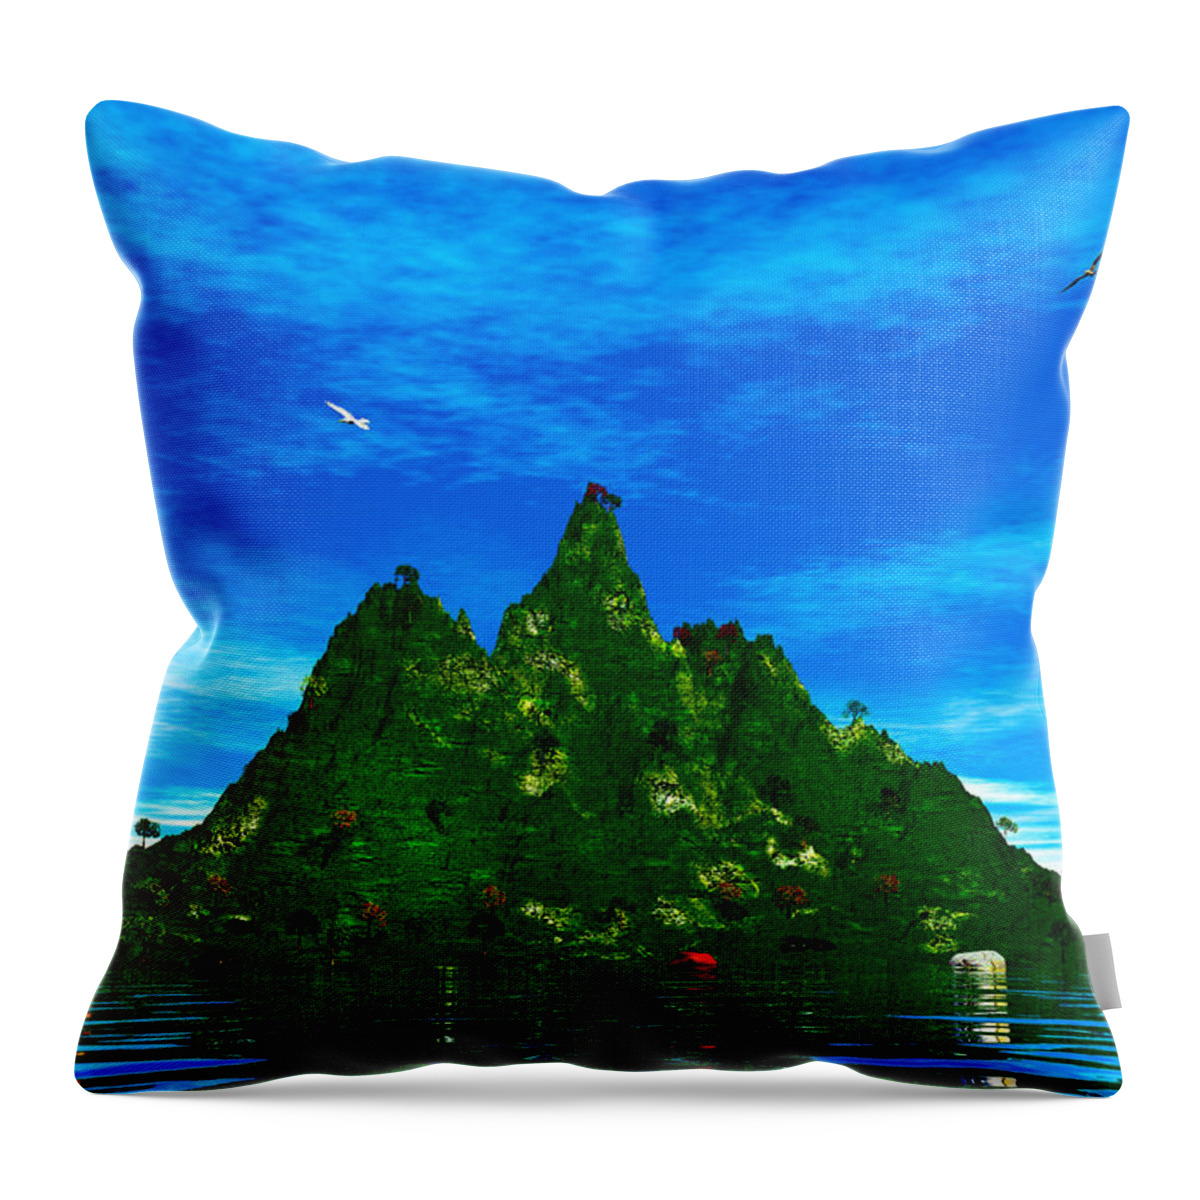 Solitude Throw Pillow featuring the photograph Solitude by Mark Blauhoefer